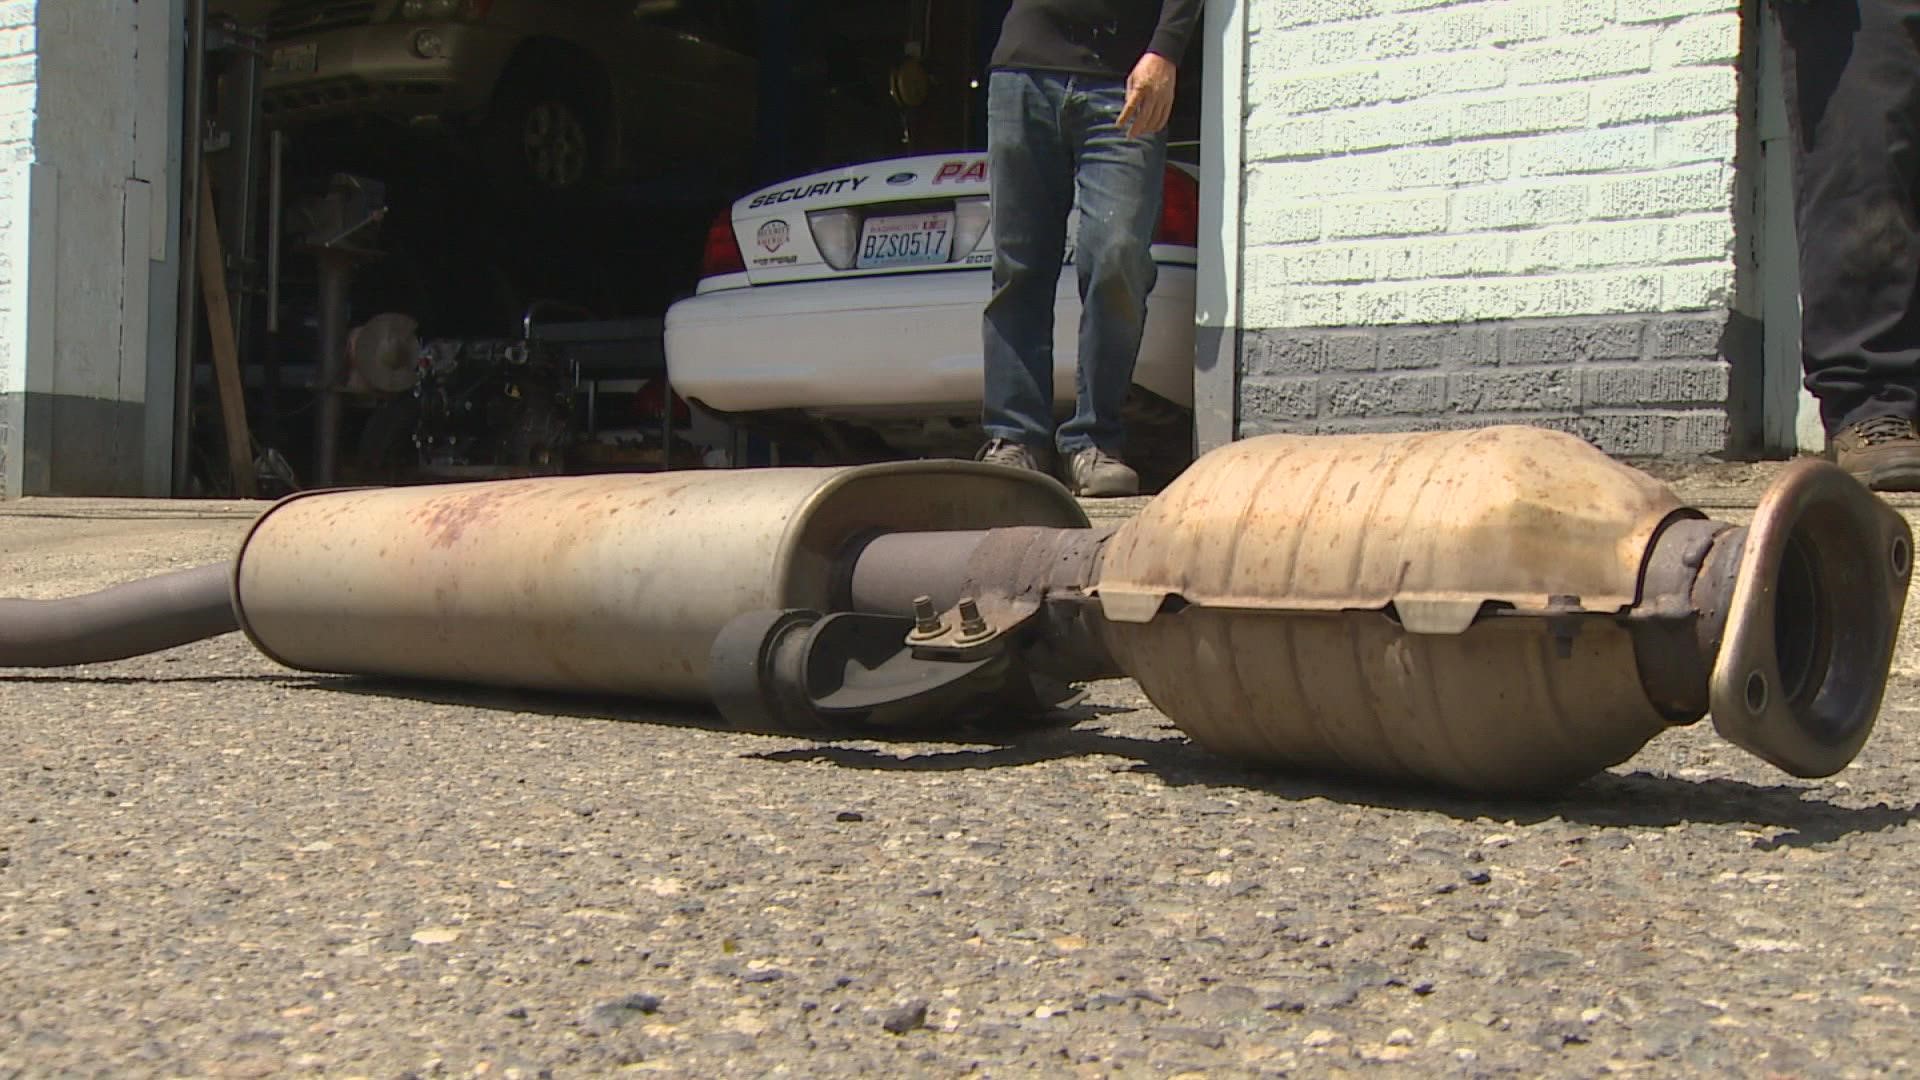 A new law to deter catalytic converter theft goes into effect July 1st that puts more rules on scrap metal businesses.